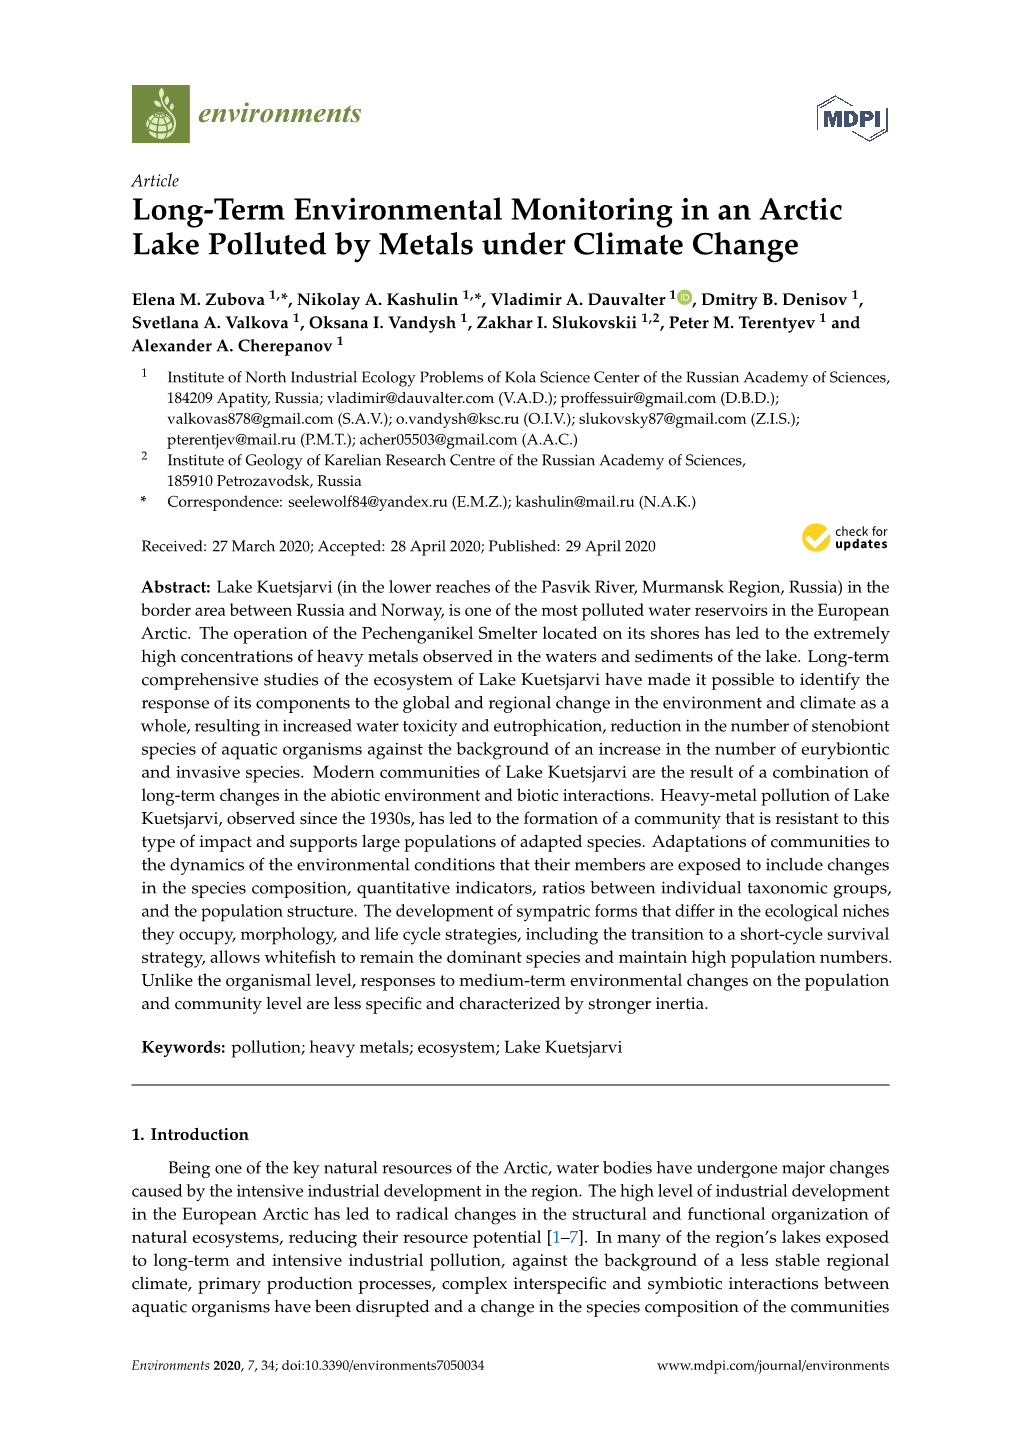 Long-Term Environmental Monitoring in an Arctic Lake Polluted by Metals Under Climate Change